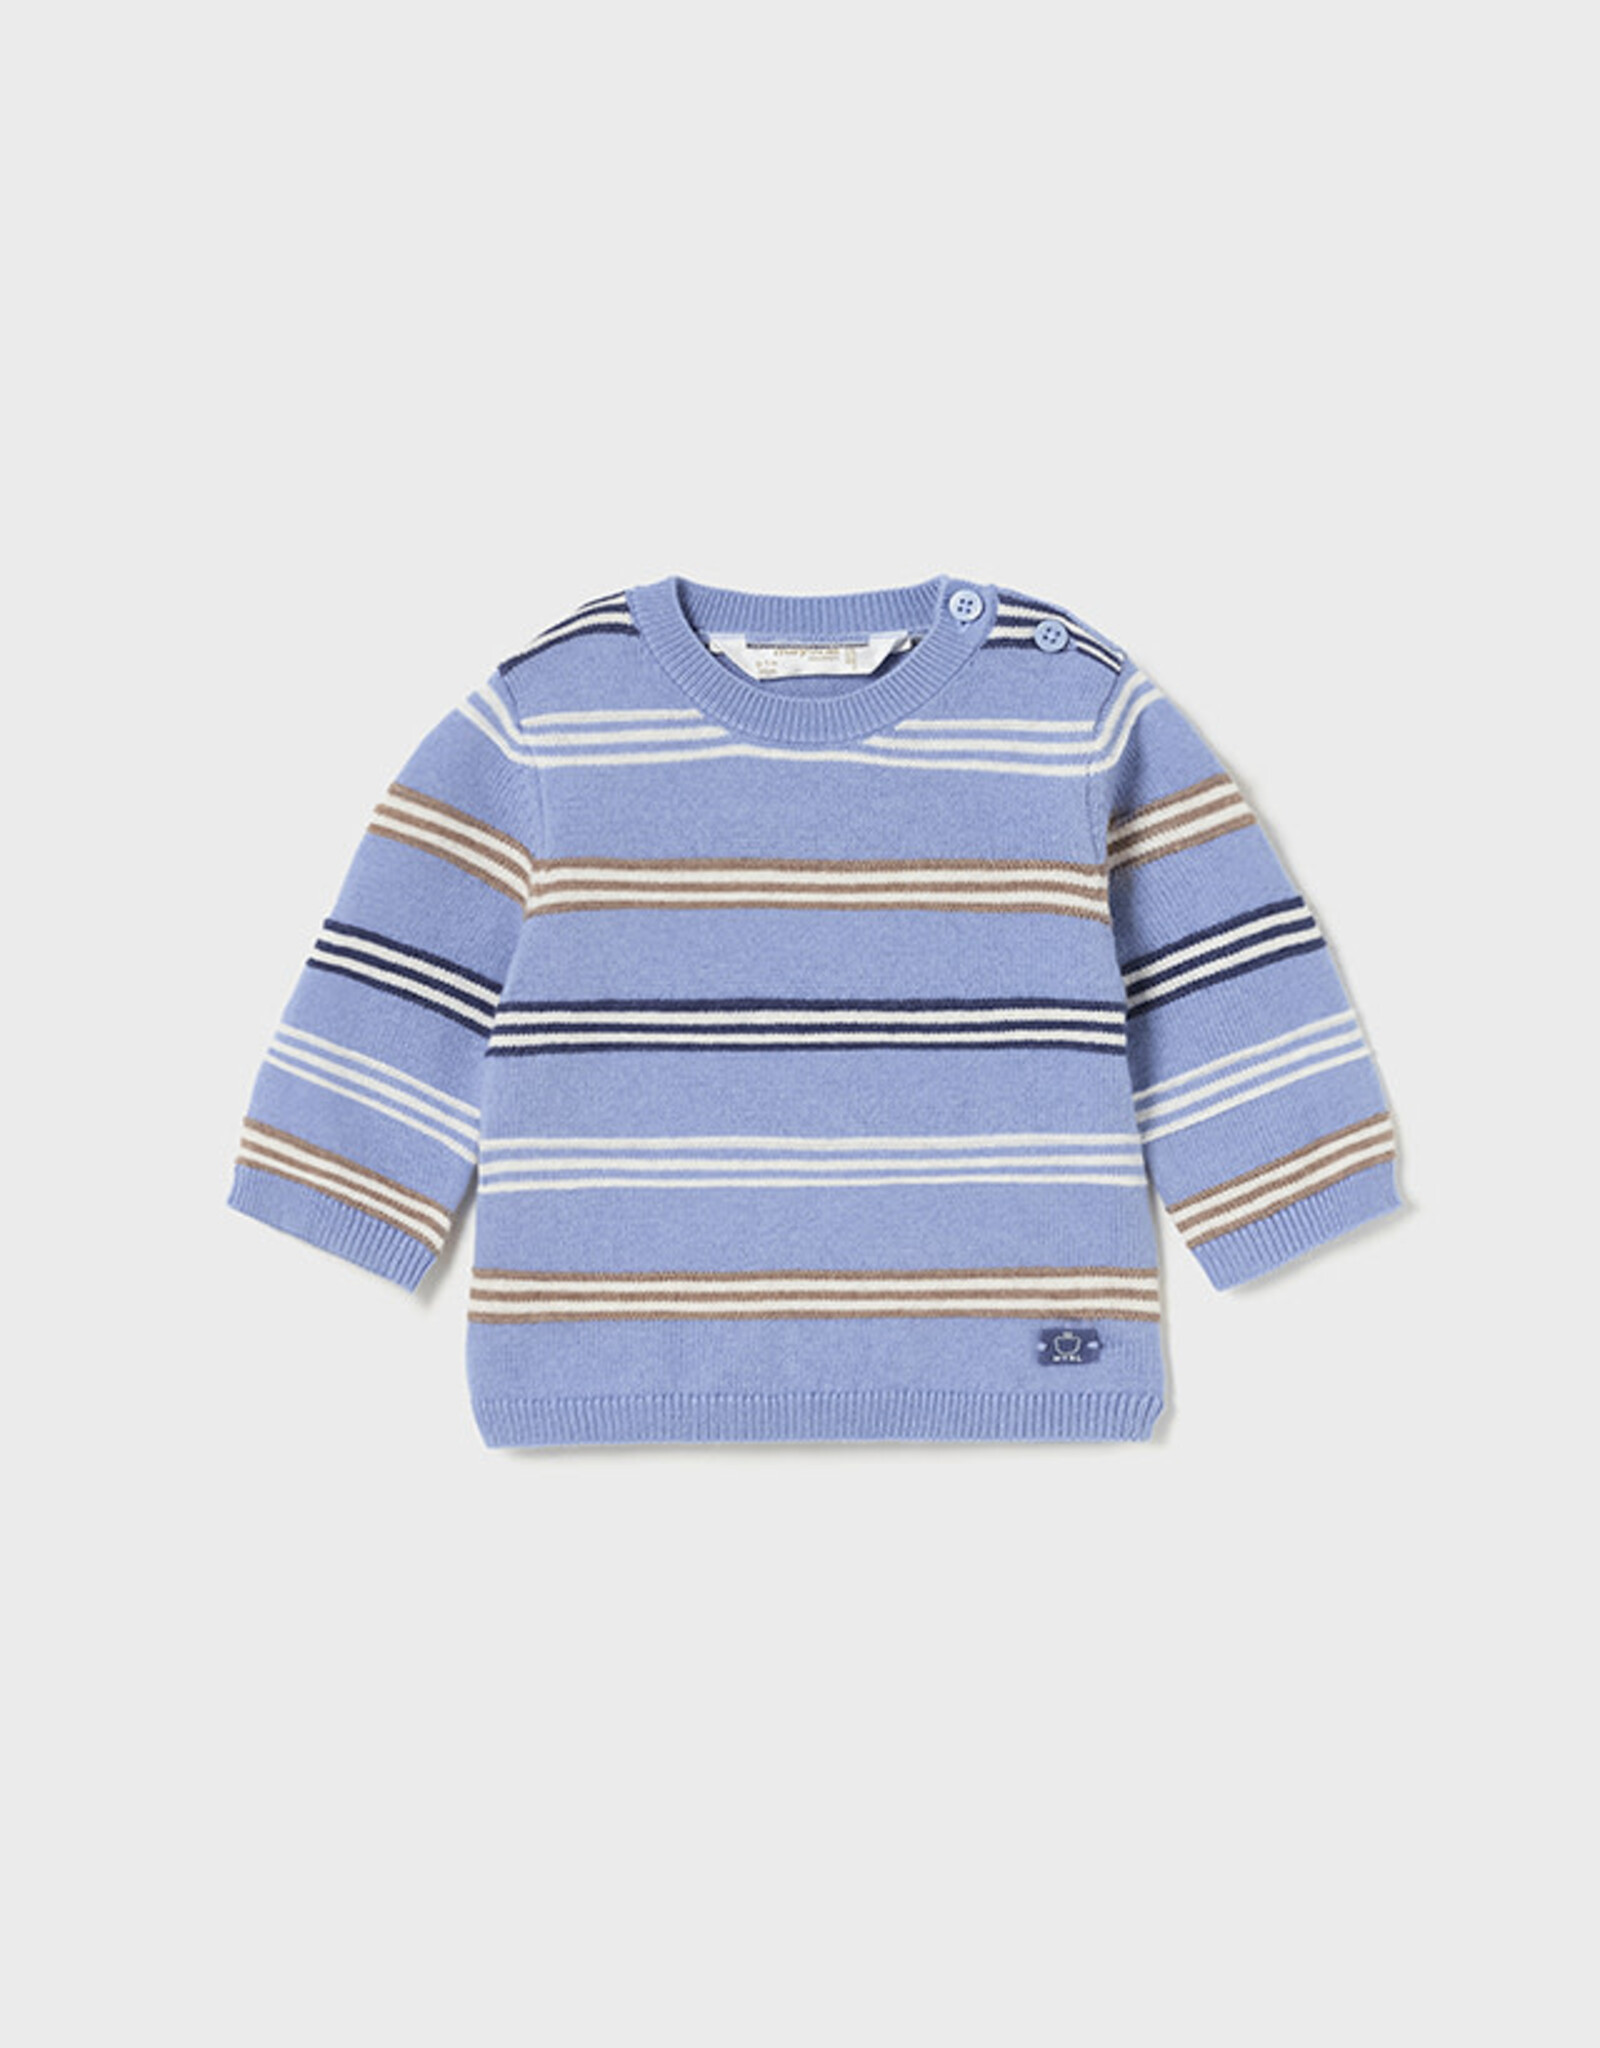 Mayoral Sweater, Blue Striped